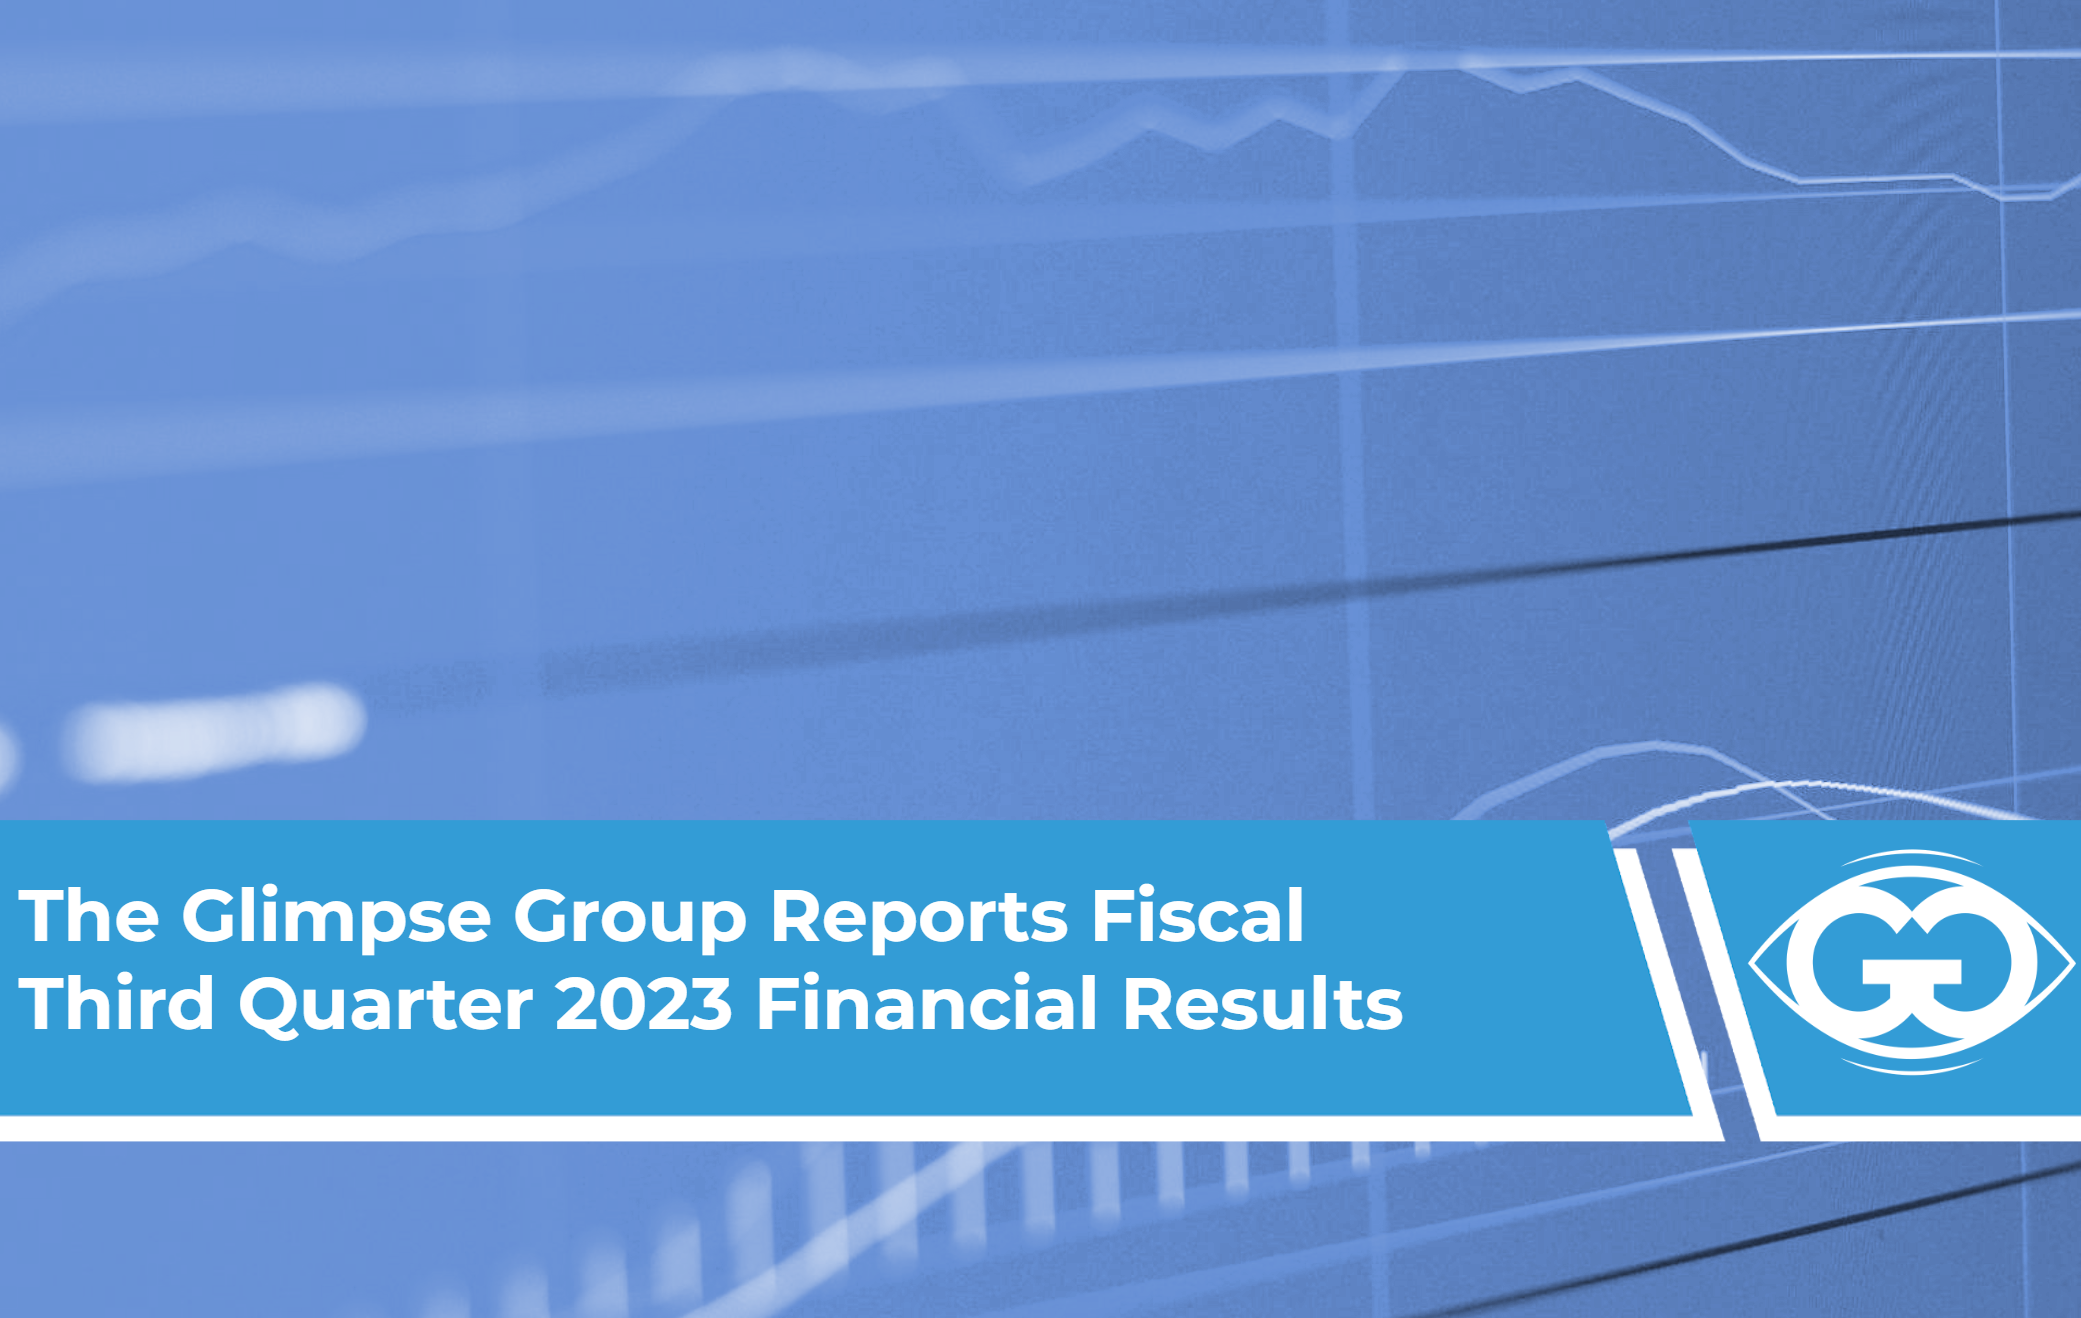 The Glimpse Group Reports Fiscal Third Quarter 2023 Financial Results